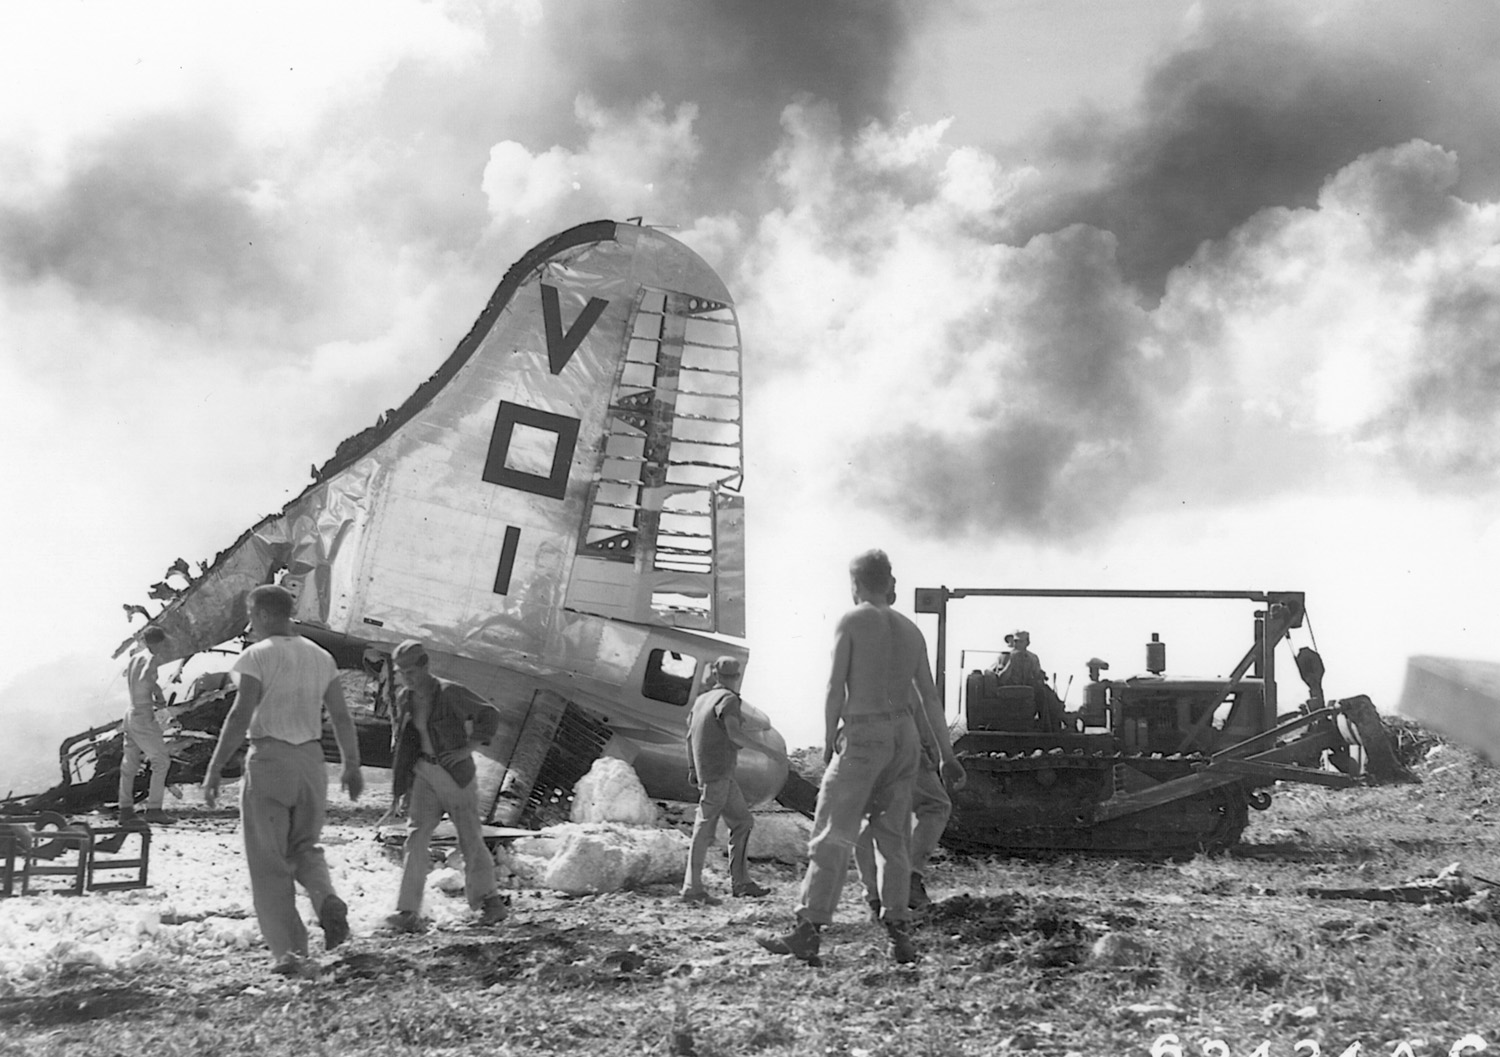 Following a Japanese raid on the U.S. airbase at Saipan, November 27, 1944, the tail section of a destroyed B-29 is visible as the rest of the bomber burns.